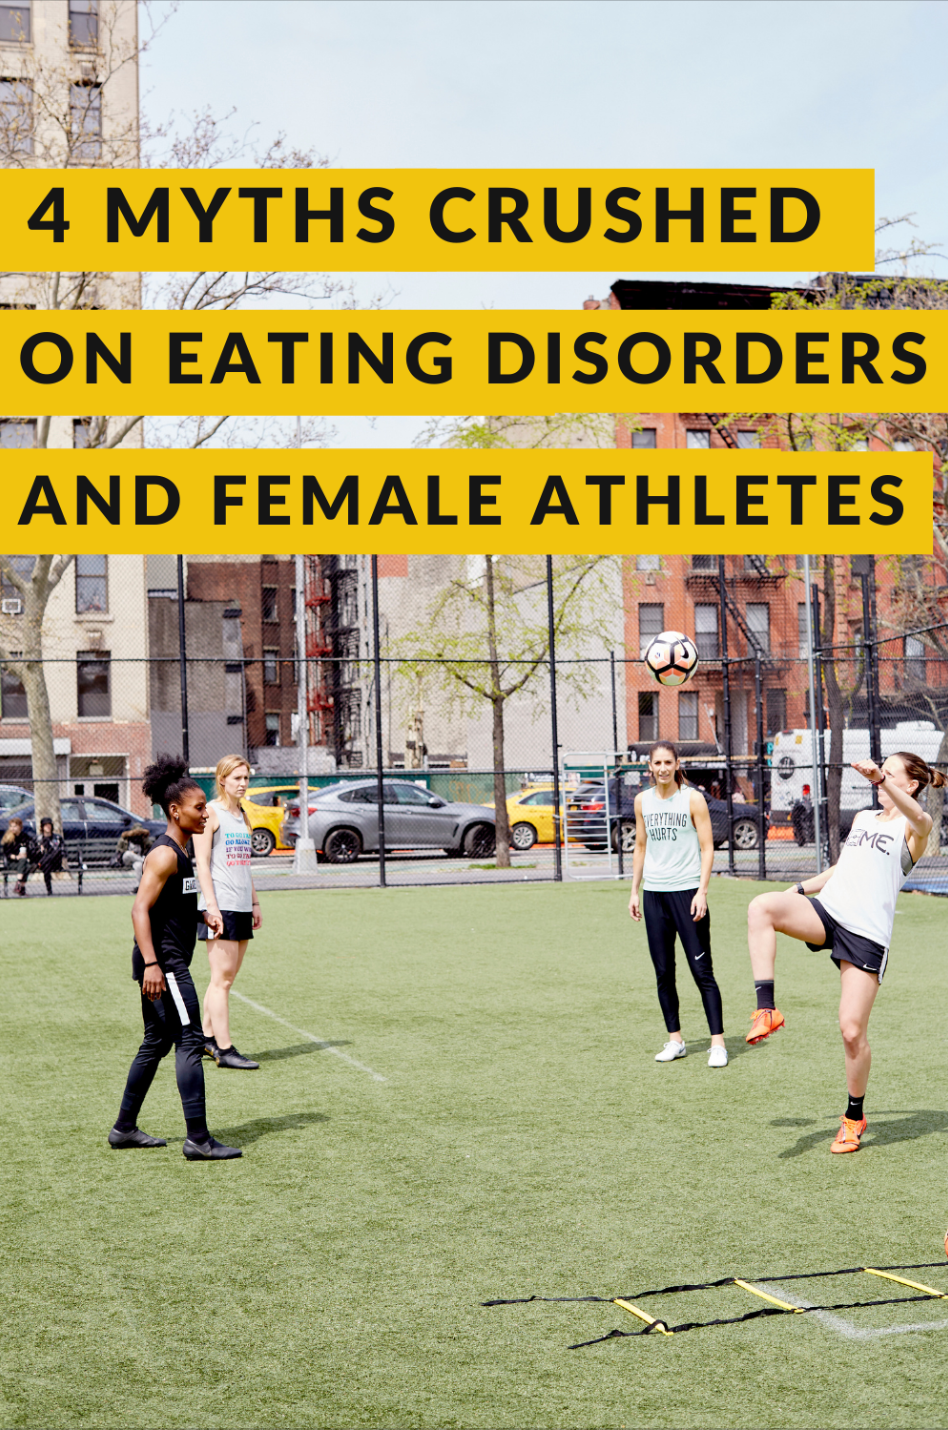 4 Myths Crushed on Eating Disorders and Female Athletes